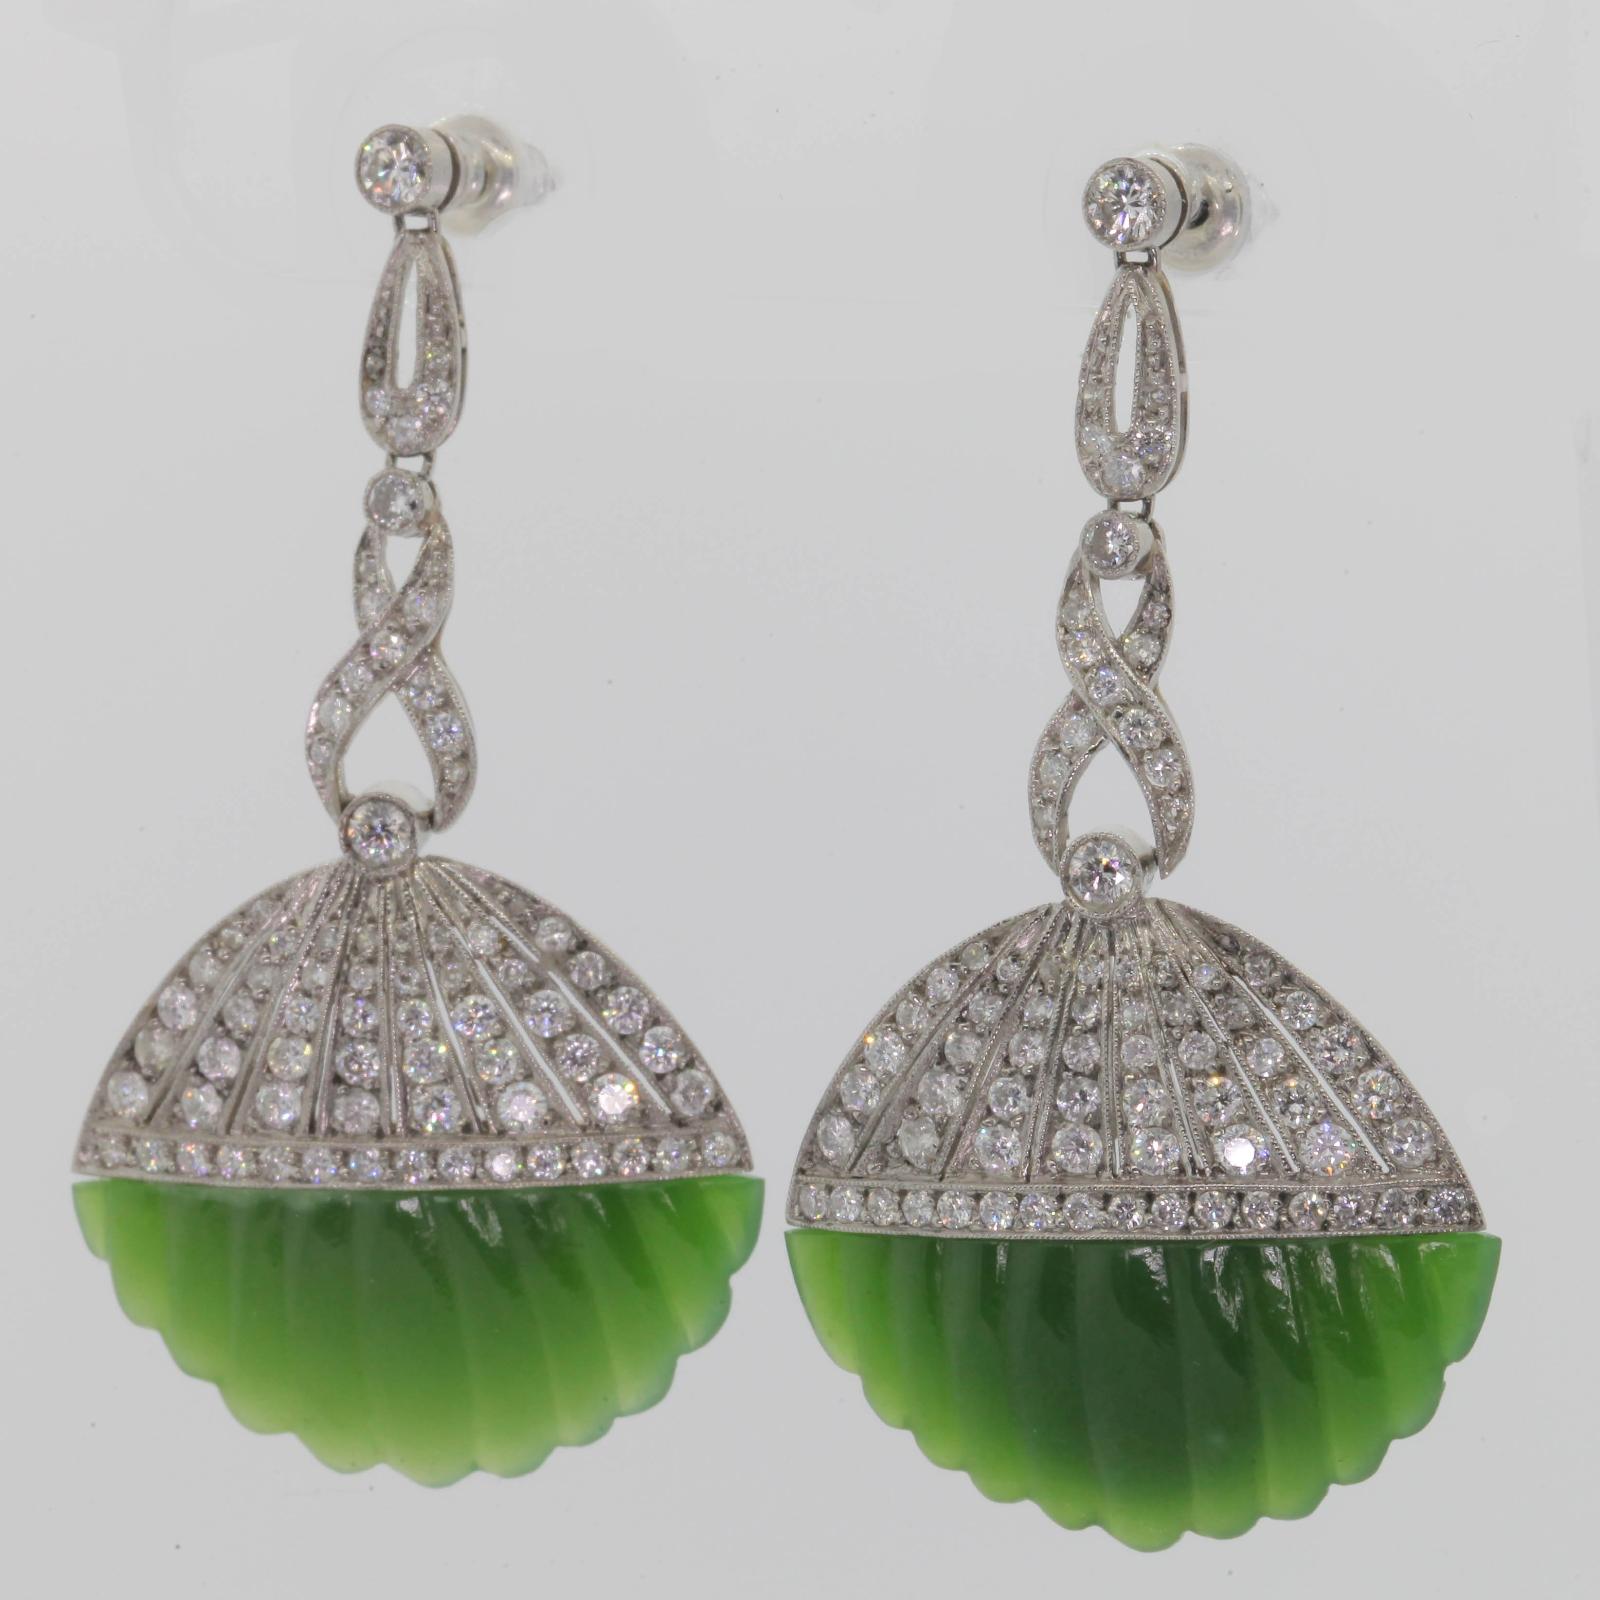 Beautifully hand crafted, articulated platinum earrings featuring stylized fluted shells of green Nephrite Jade.  The Jade plaques are suspended from platinum diamond caps and a swirl style bars.  The total diamond weight is 2.70 carats of Round